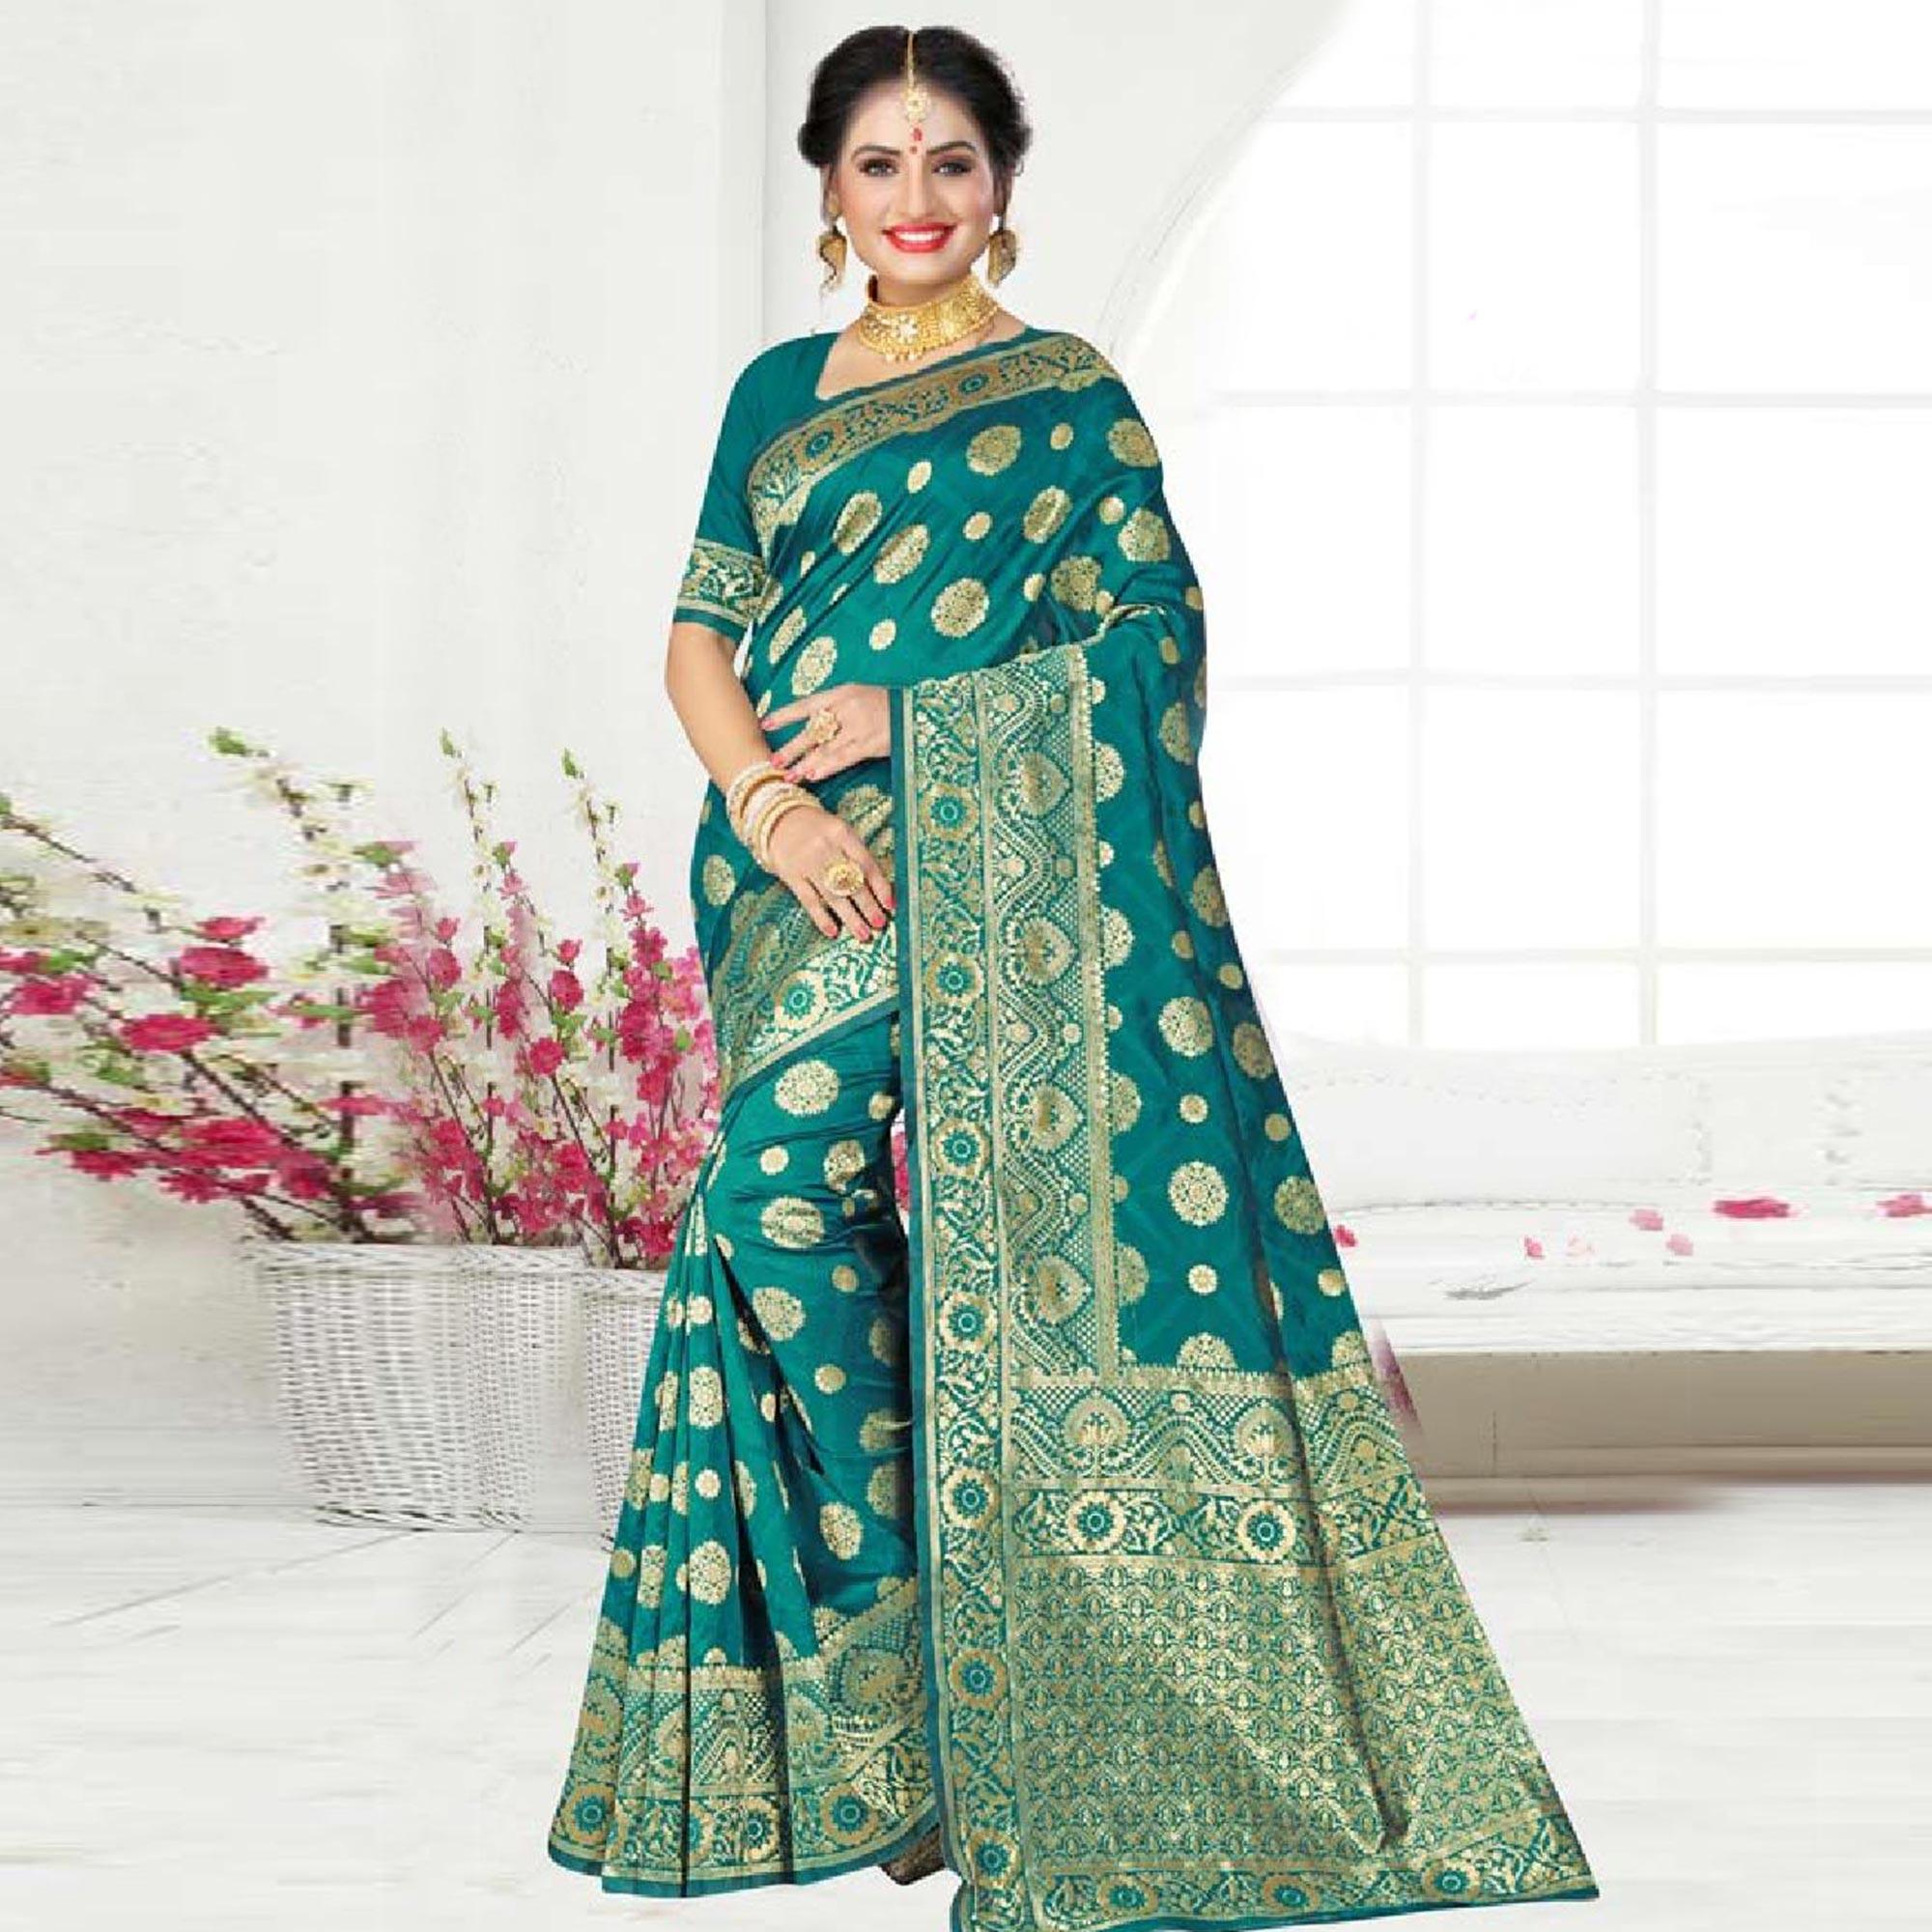 Engrossing Turquoise Green Colored Festive Wear Woven Art Silk Saree - Peachmode